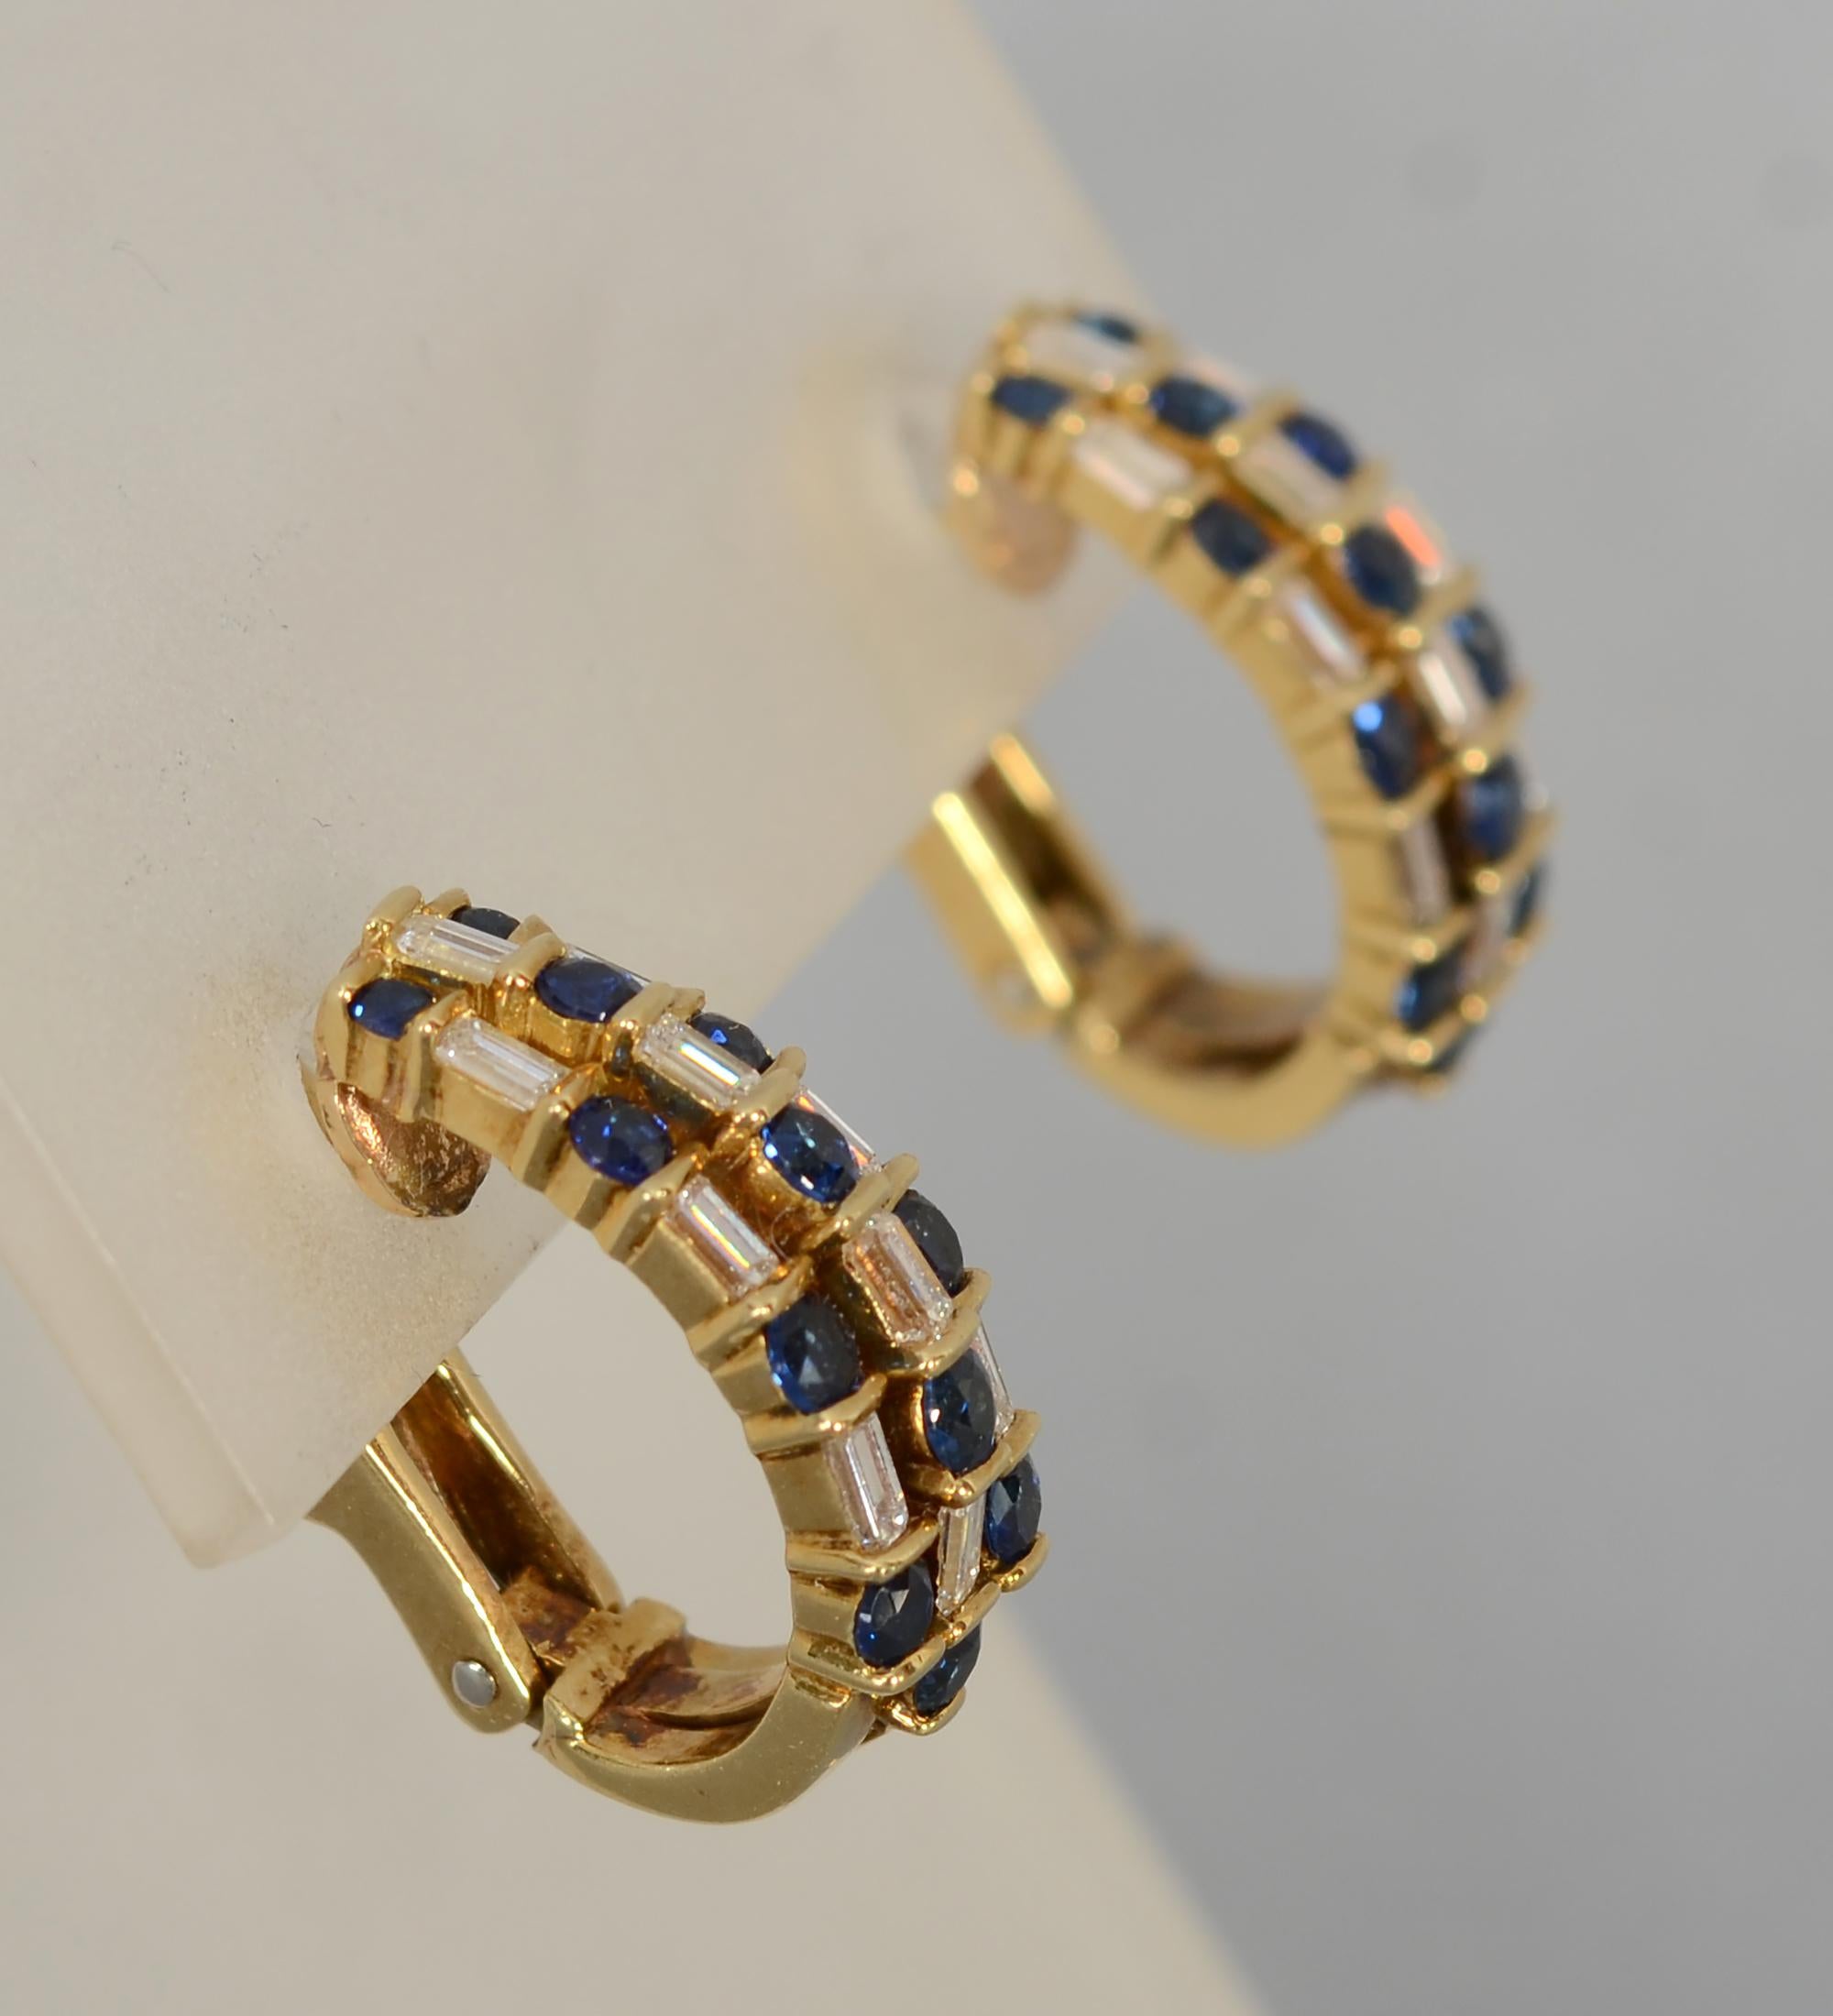 Finely made half hoop earrings by Gemlok with alternating baguette diamonds and round sapphires. Omega backs are hinged with posts. The earrings are 3/4